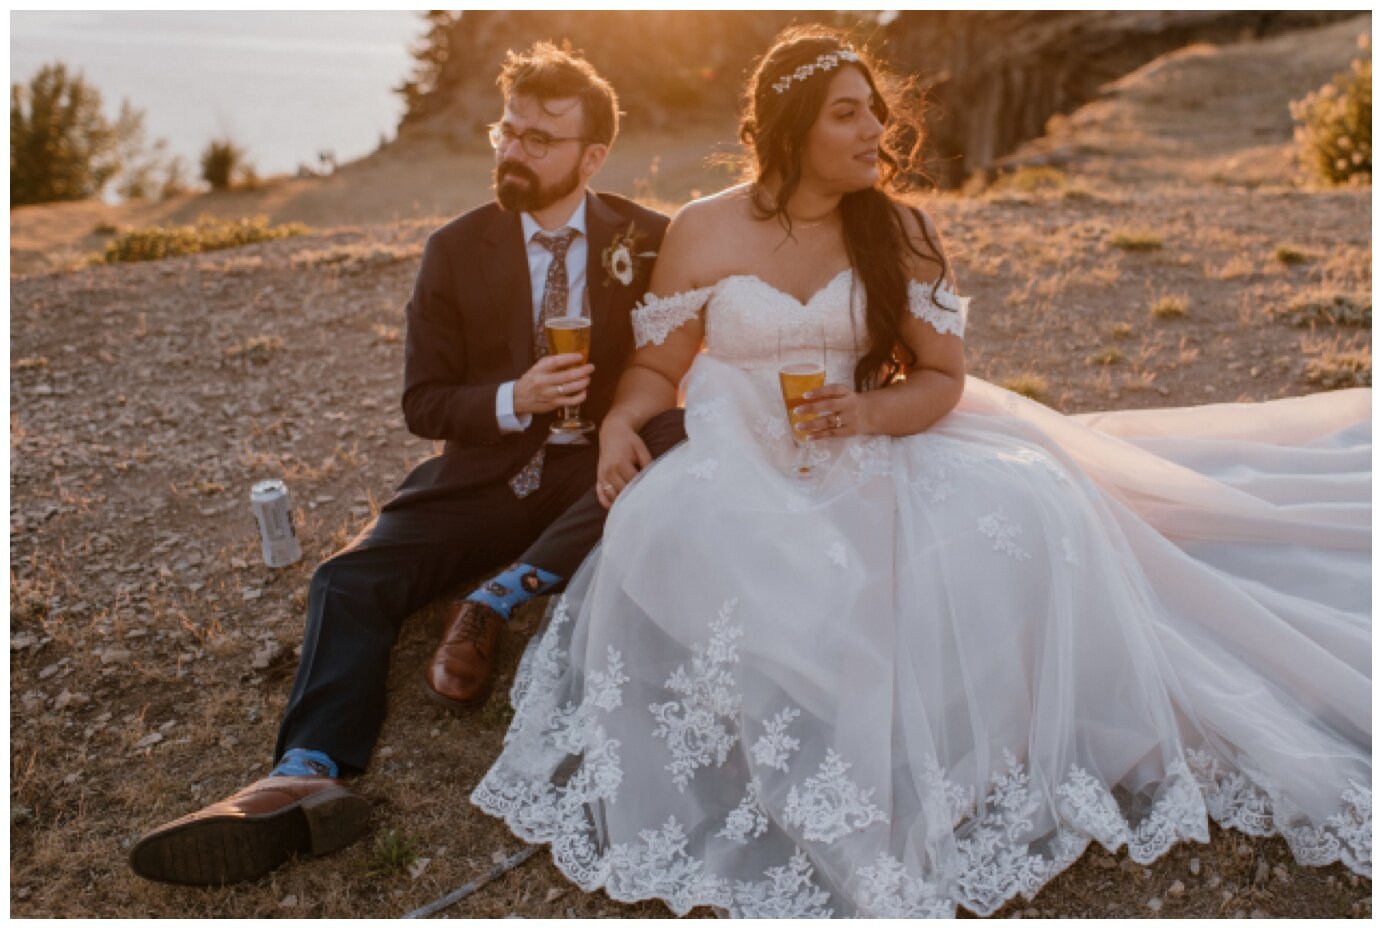 Elopement at Government Cove Peninsula - Madeline Rose Photography - PNW Elopement Photographer_0024.jpg